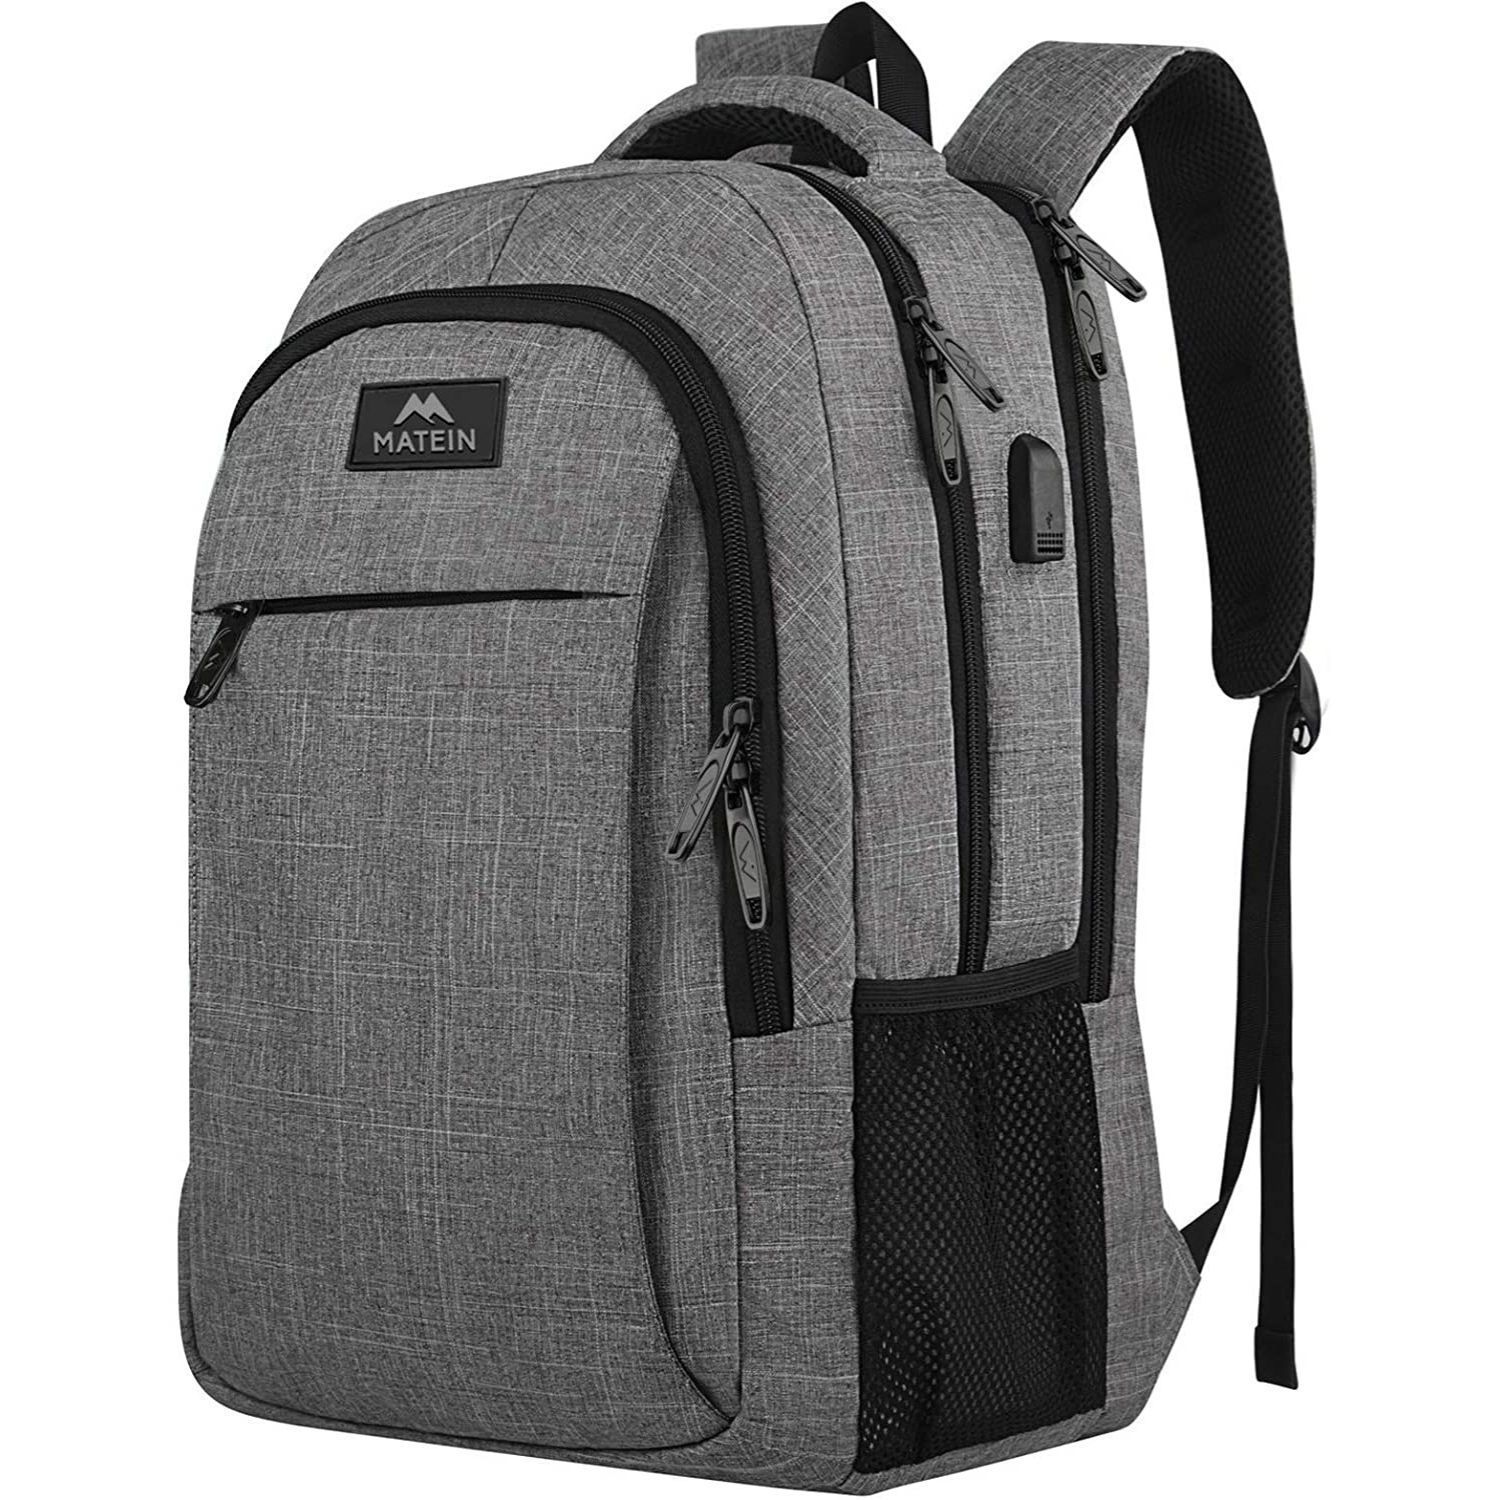 65 L TRAVEL BACKPACK FOR OUTDOOR SPORT HIKING TREKKING BAG CAMPING RUCKSACK  WITH LAPTOP COMPARTMENT